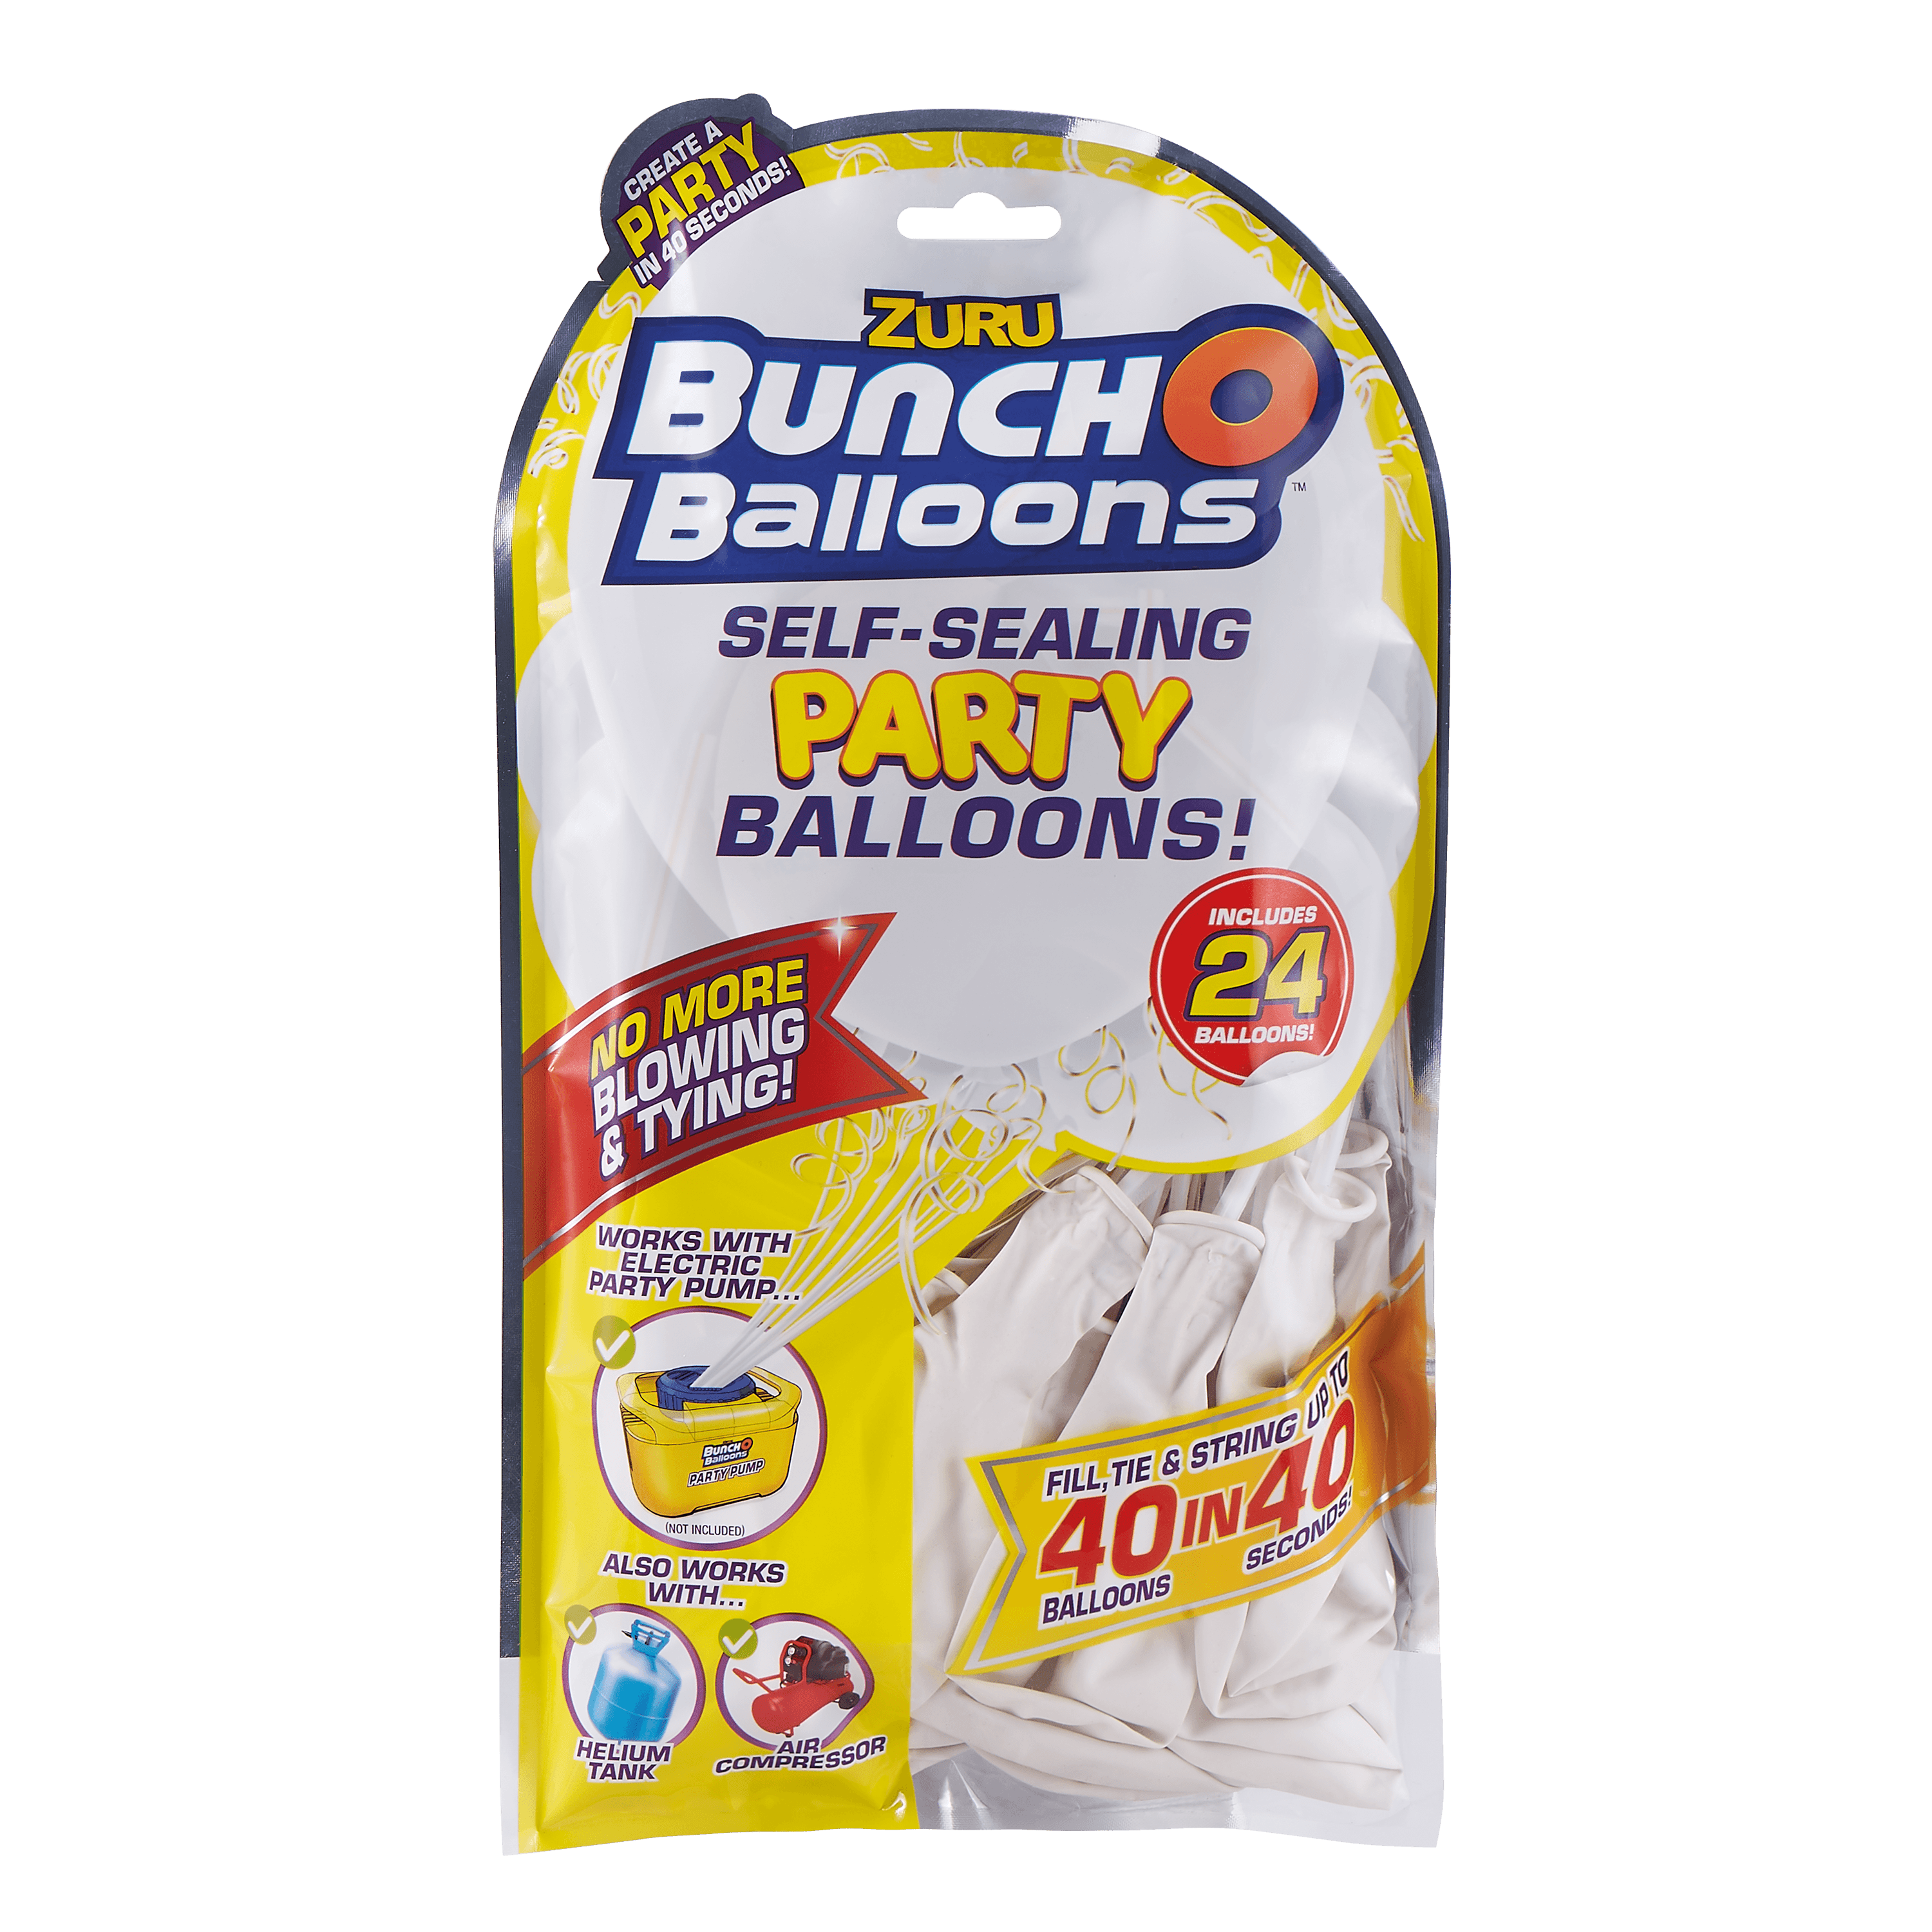 Bunch O Balloons Self-Sealing Latex Party Balloons, White, 11in, 24ct - image 3 of 10